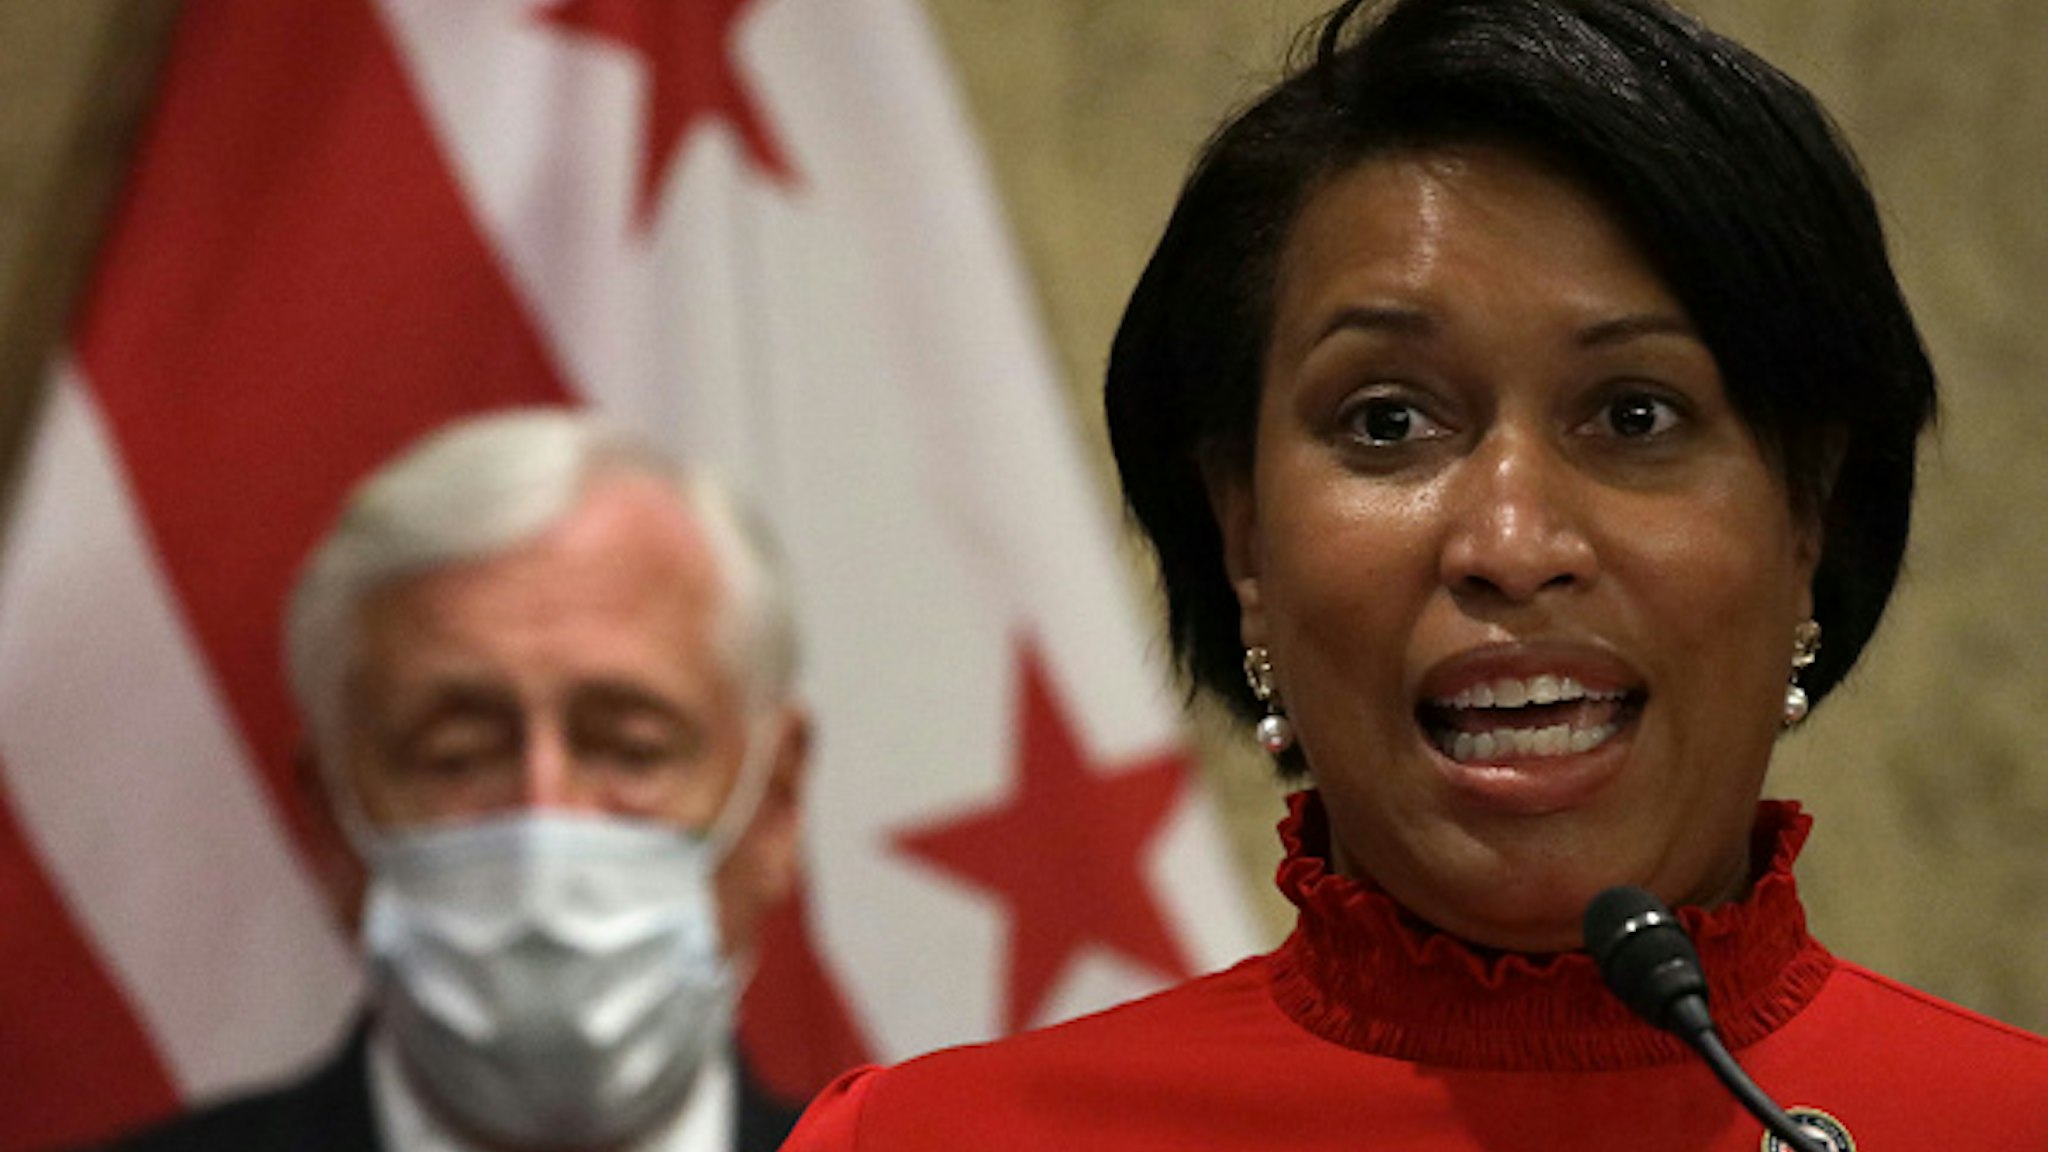 WASHINGTON, DC - JUNE 25: DC Mayor Muriel Bowser speaks as U.S. House Majority Leader Rep. Steny Hoyer (D-MD) listens during a news conference on District of Columbia statehood June 25, 2020 on Capitol Hill in Washington, DC. The House is scheduled to vote on the District of Columbia statehood bill tomorrow.